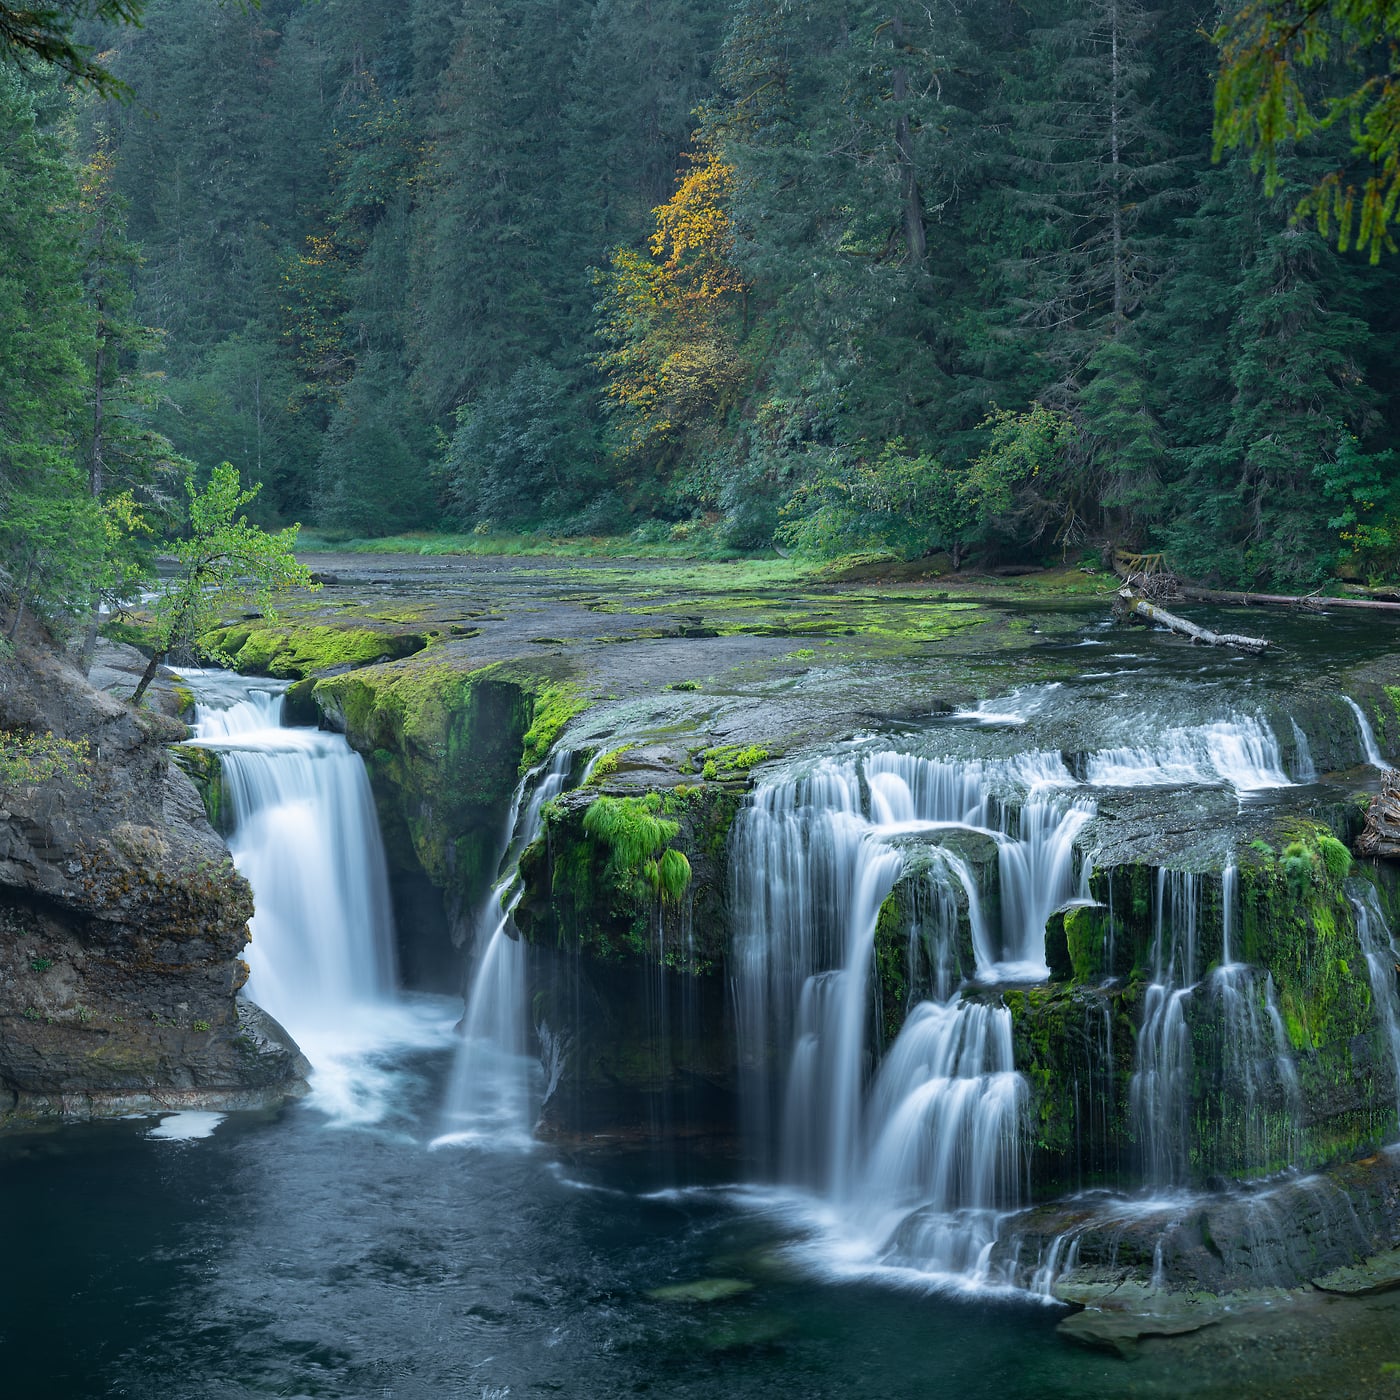 325 megapixels! A very high resolution, square photo print of a beautiful waterfall in a forest; nature photograph created by Greg Probst in Gifford Pinchot National Forest, Washington.